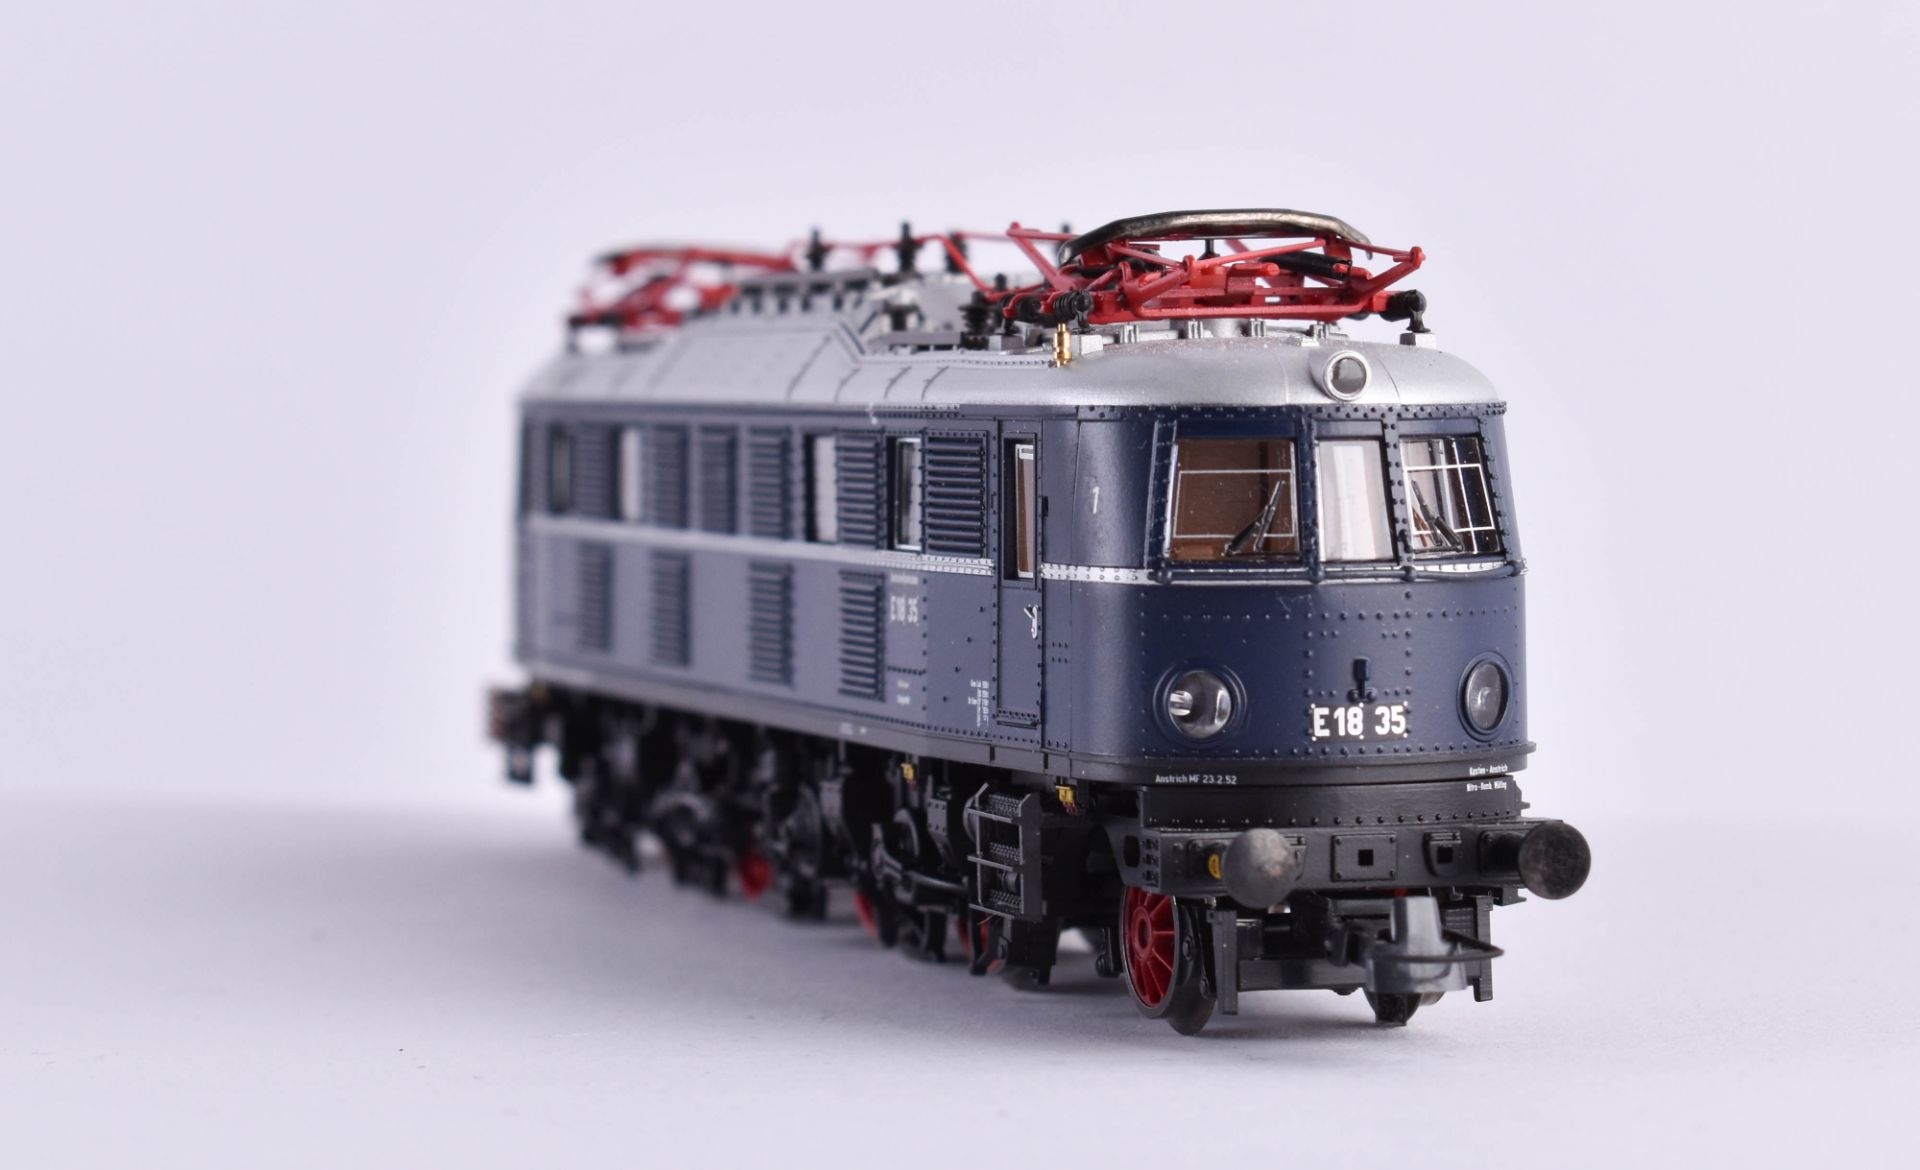 Electric locomotive E 18 35 of the DB, Roco - Image 2 of 3